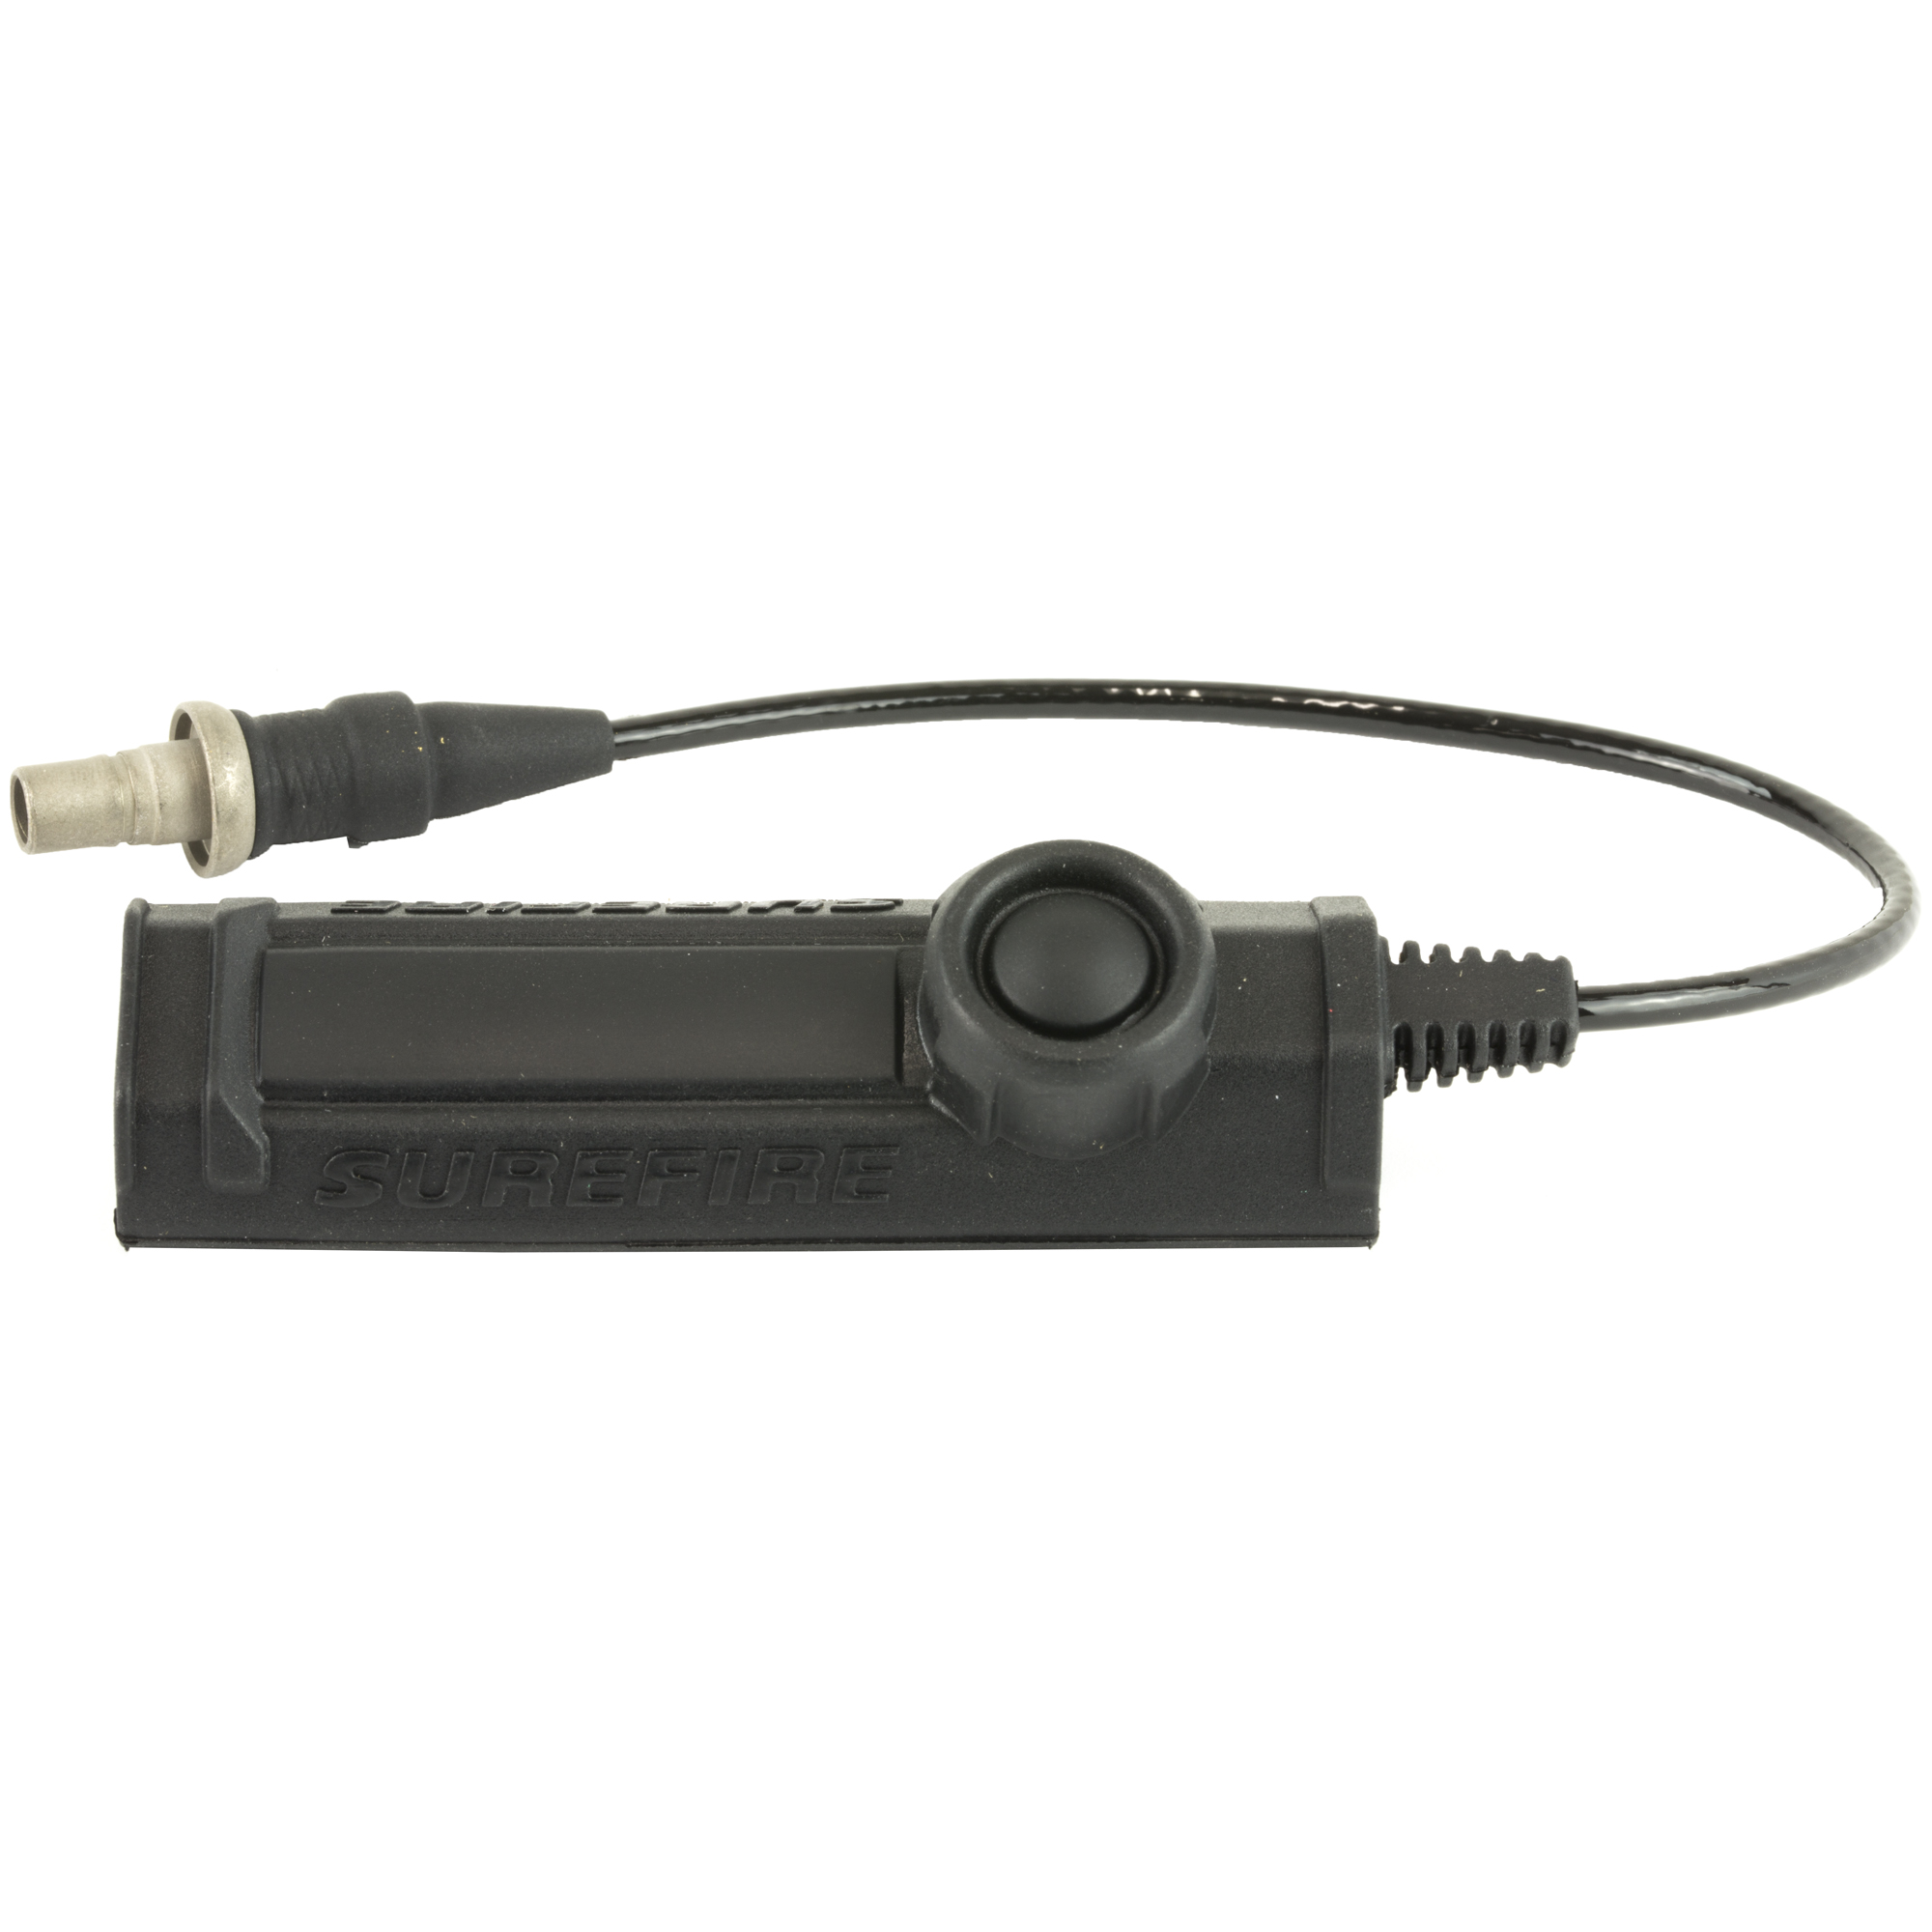 Surefire Remote Dual Switch for Weaponlights SR07